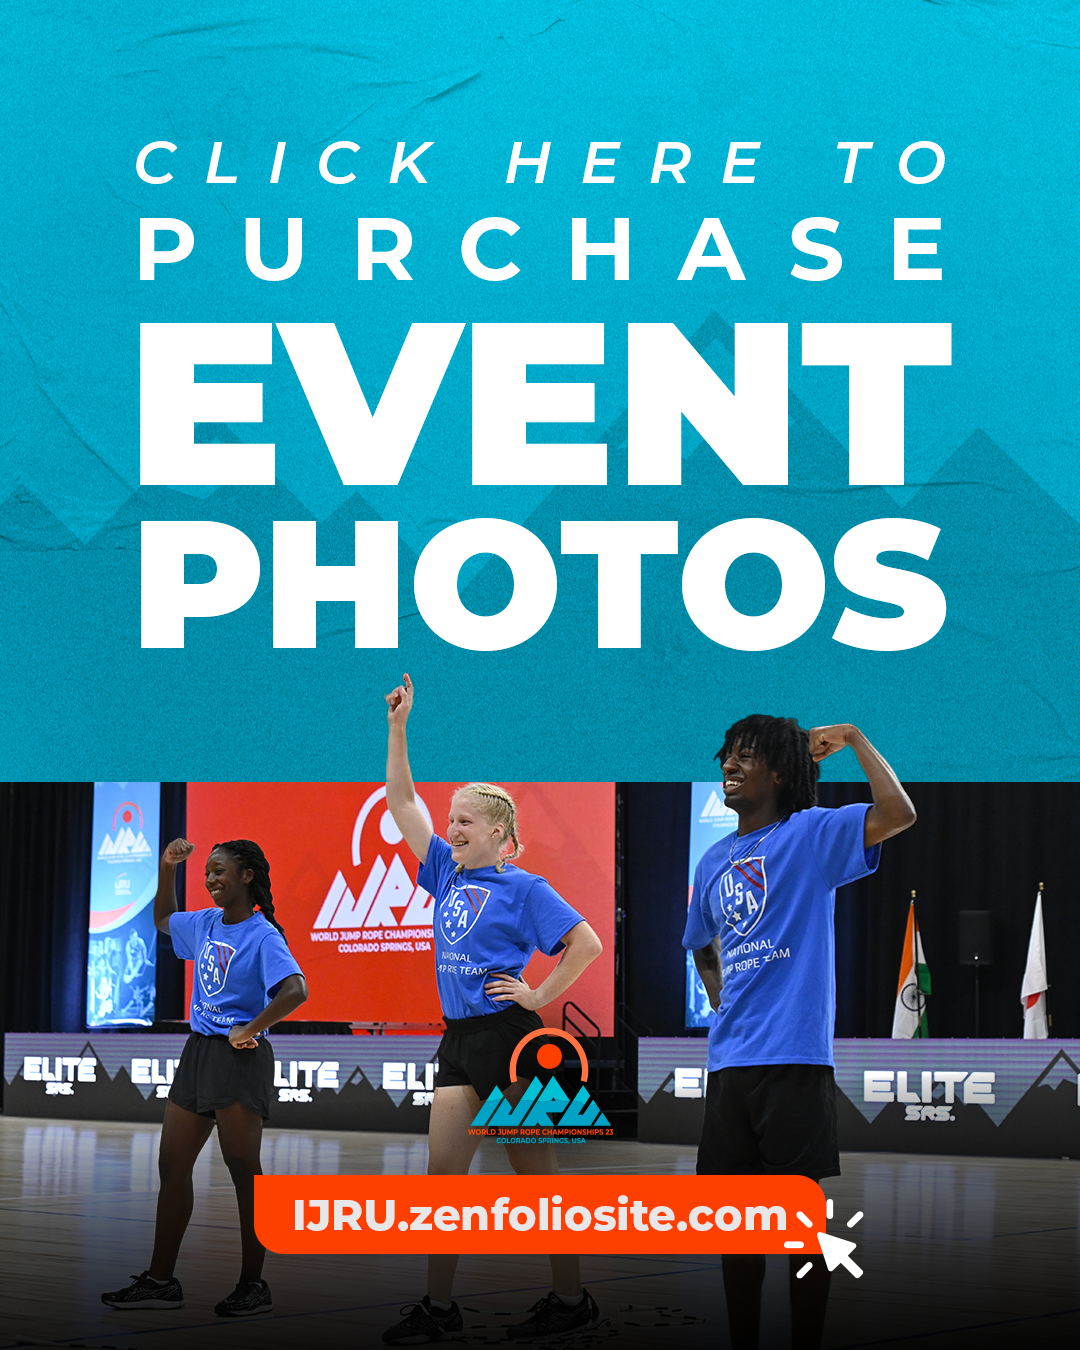  Click here to purchase event photos 